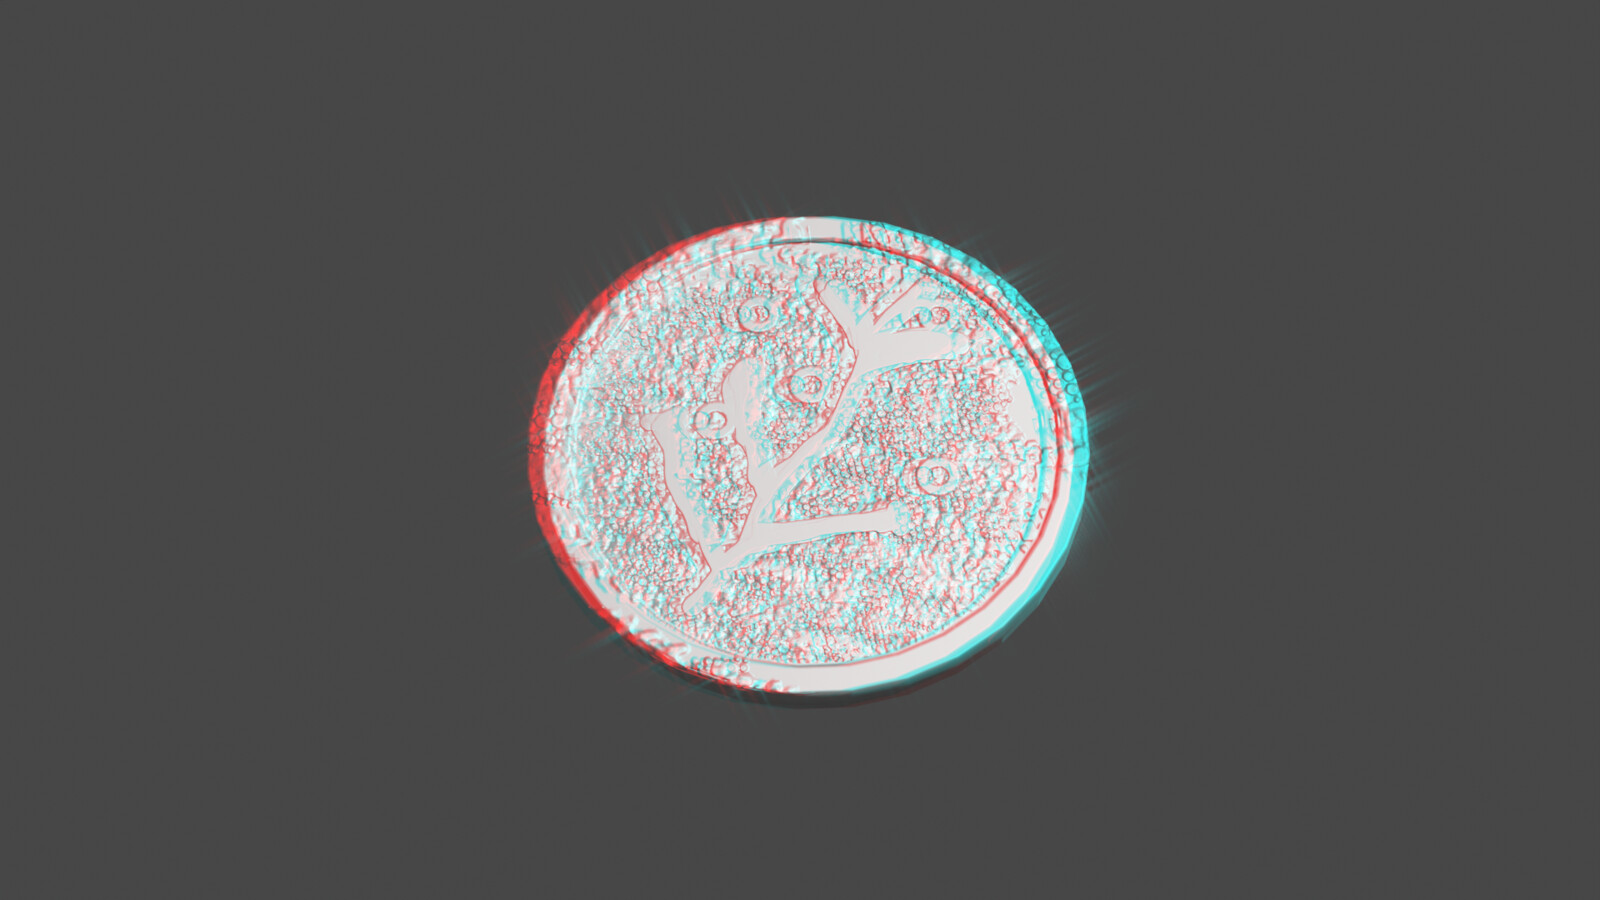 I corrected for the bump mapping flattening with a driver, hooked to the scale factor of the coin. It's twenty times its actual size here, so I could get a good look at it.